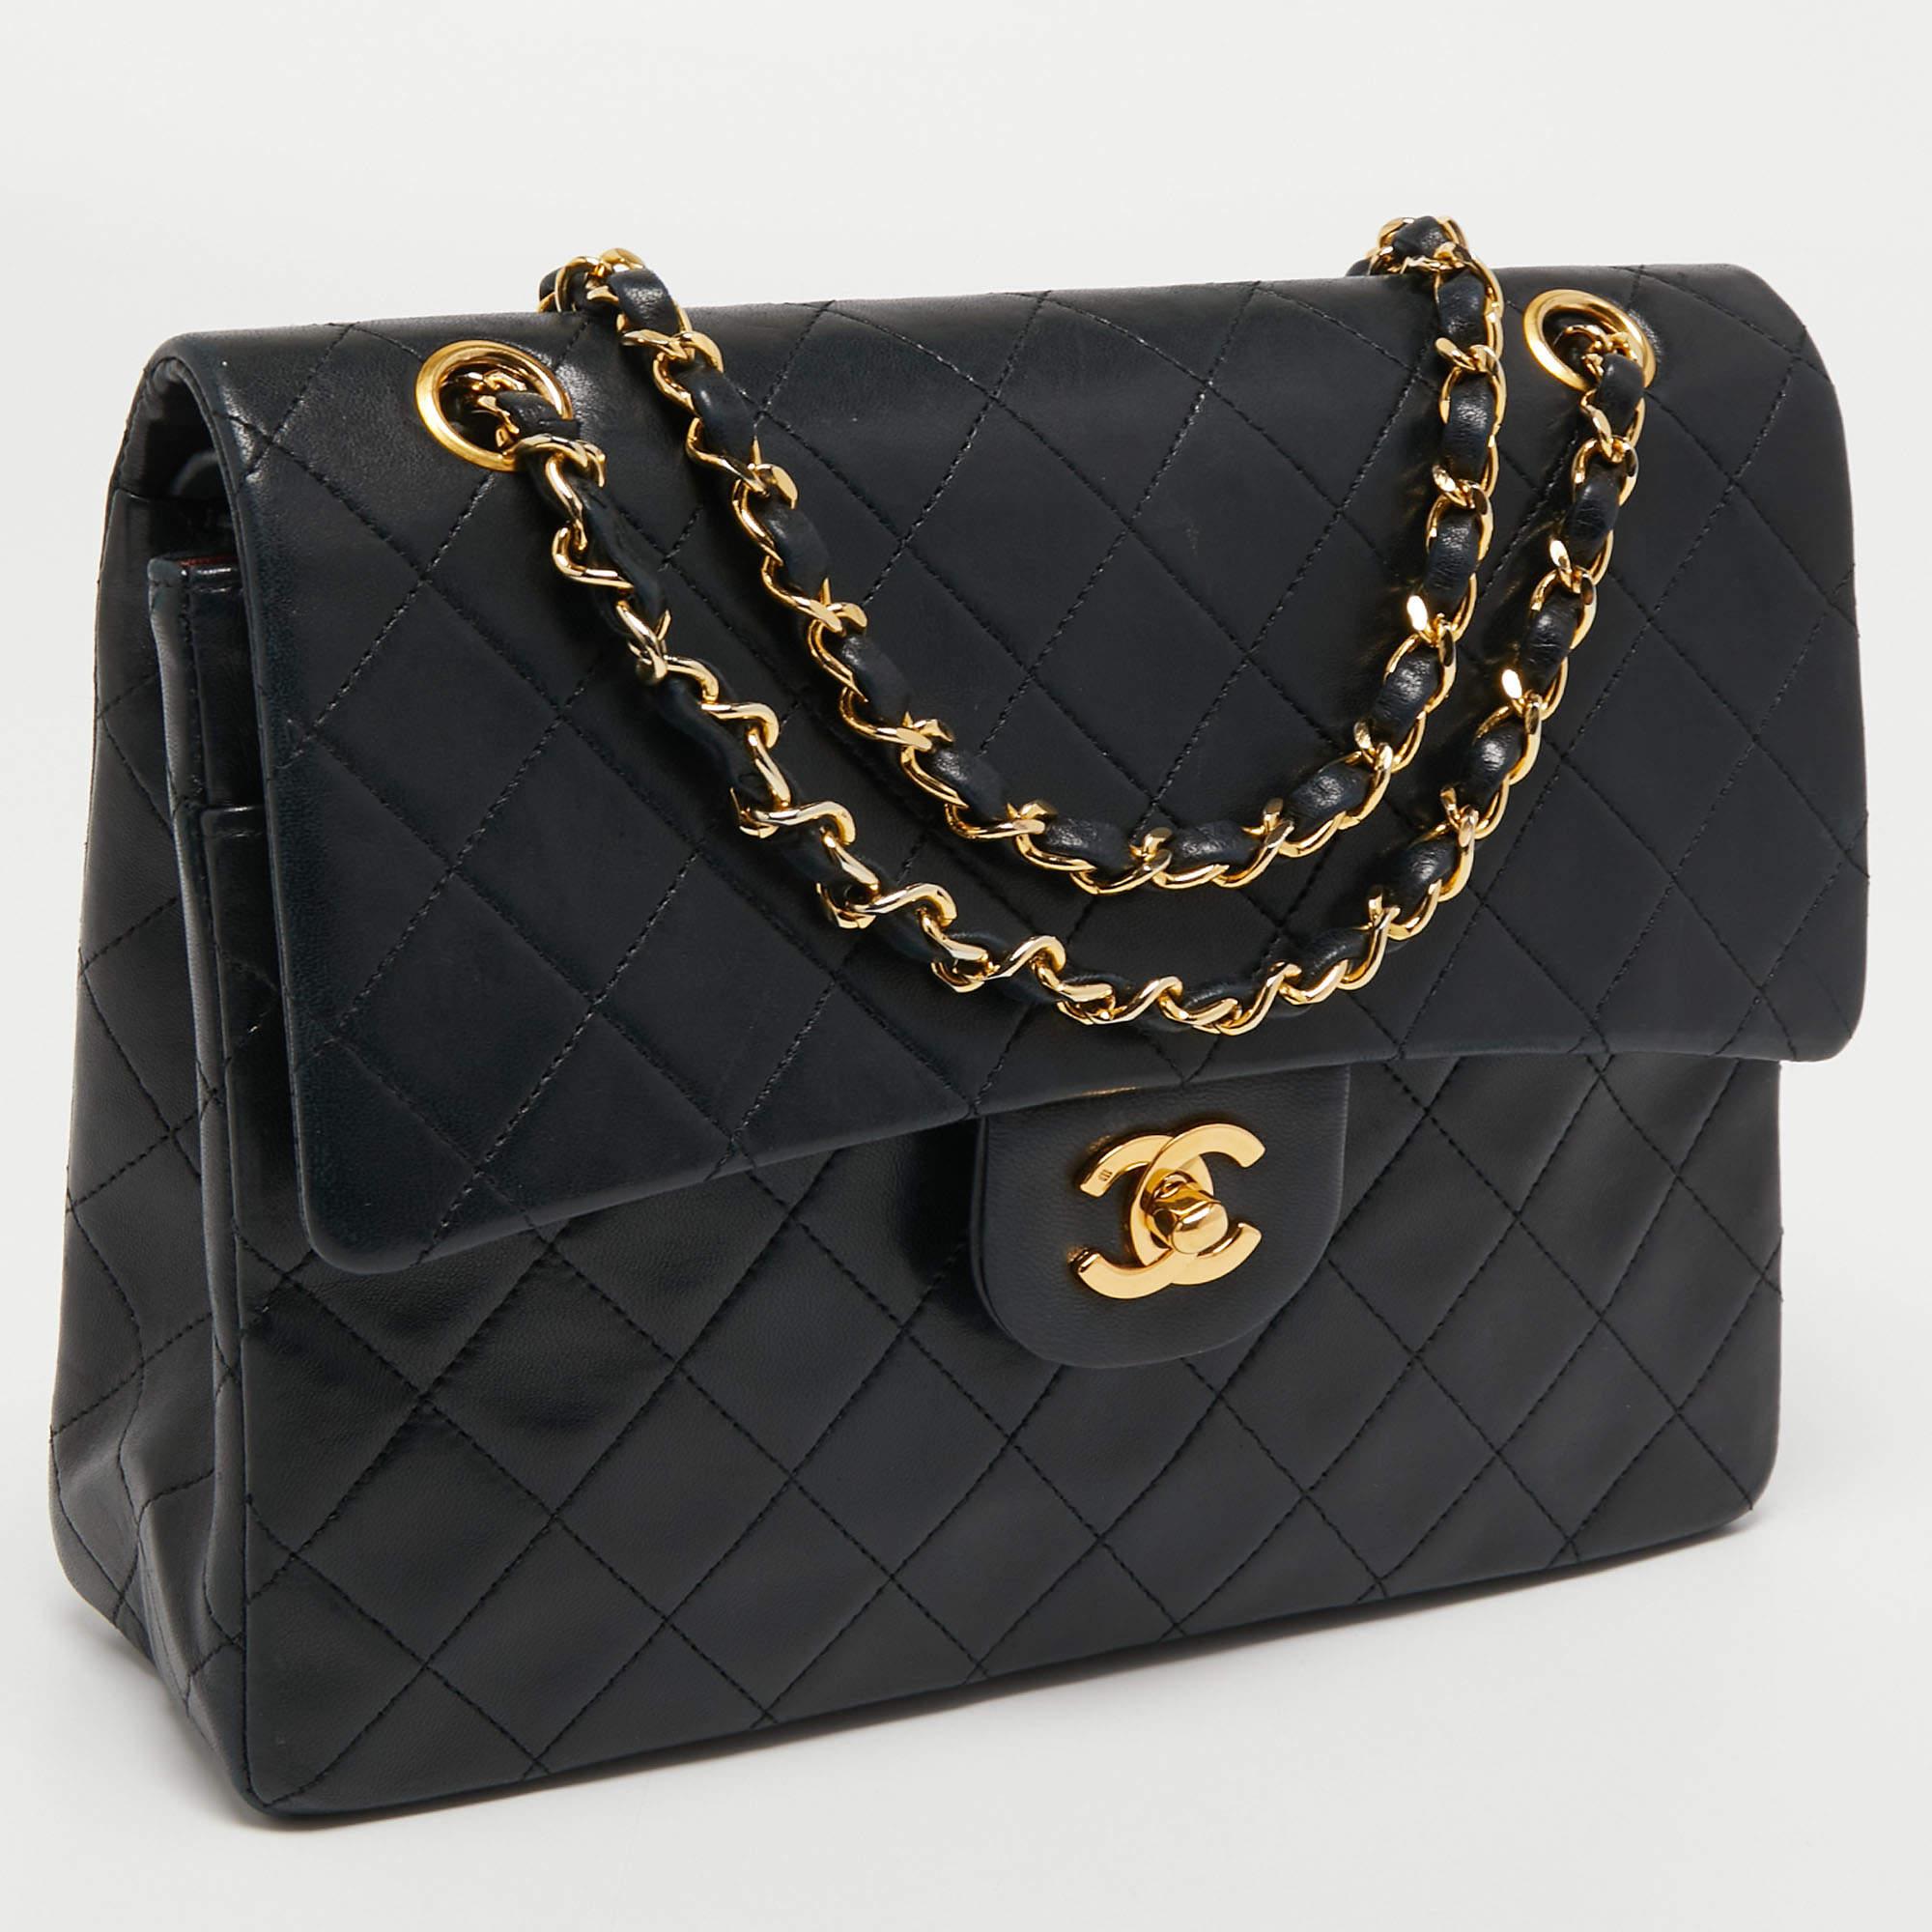 Women's Chanel Black Quilted Leather Classic Double Flap Bag